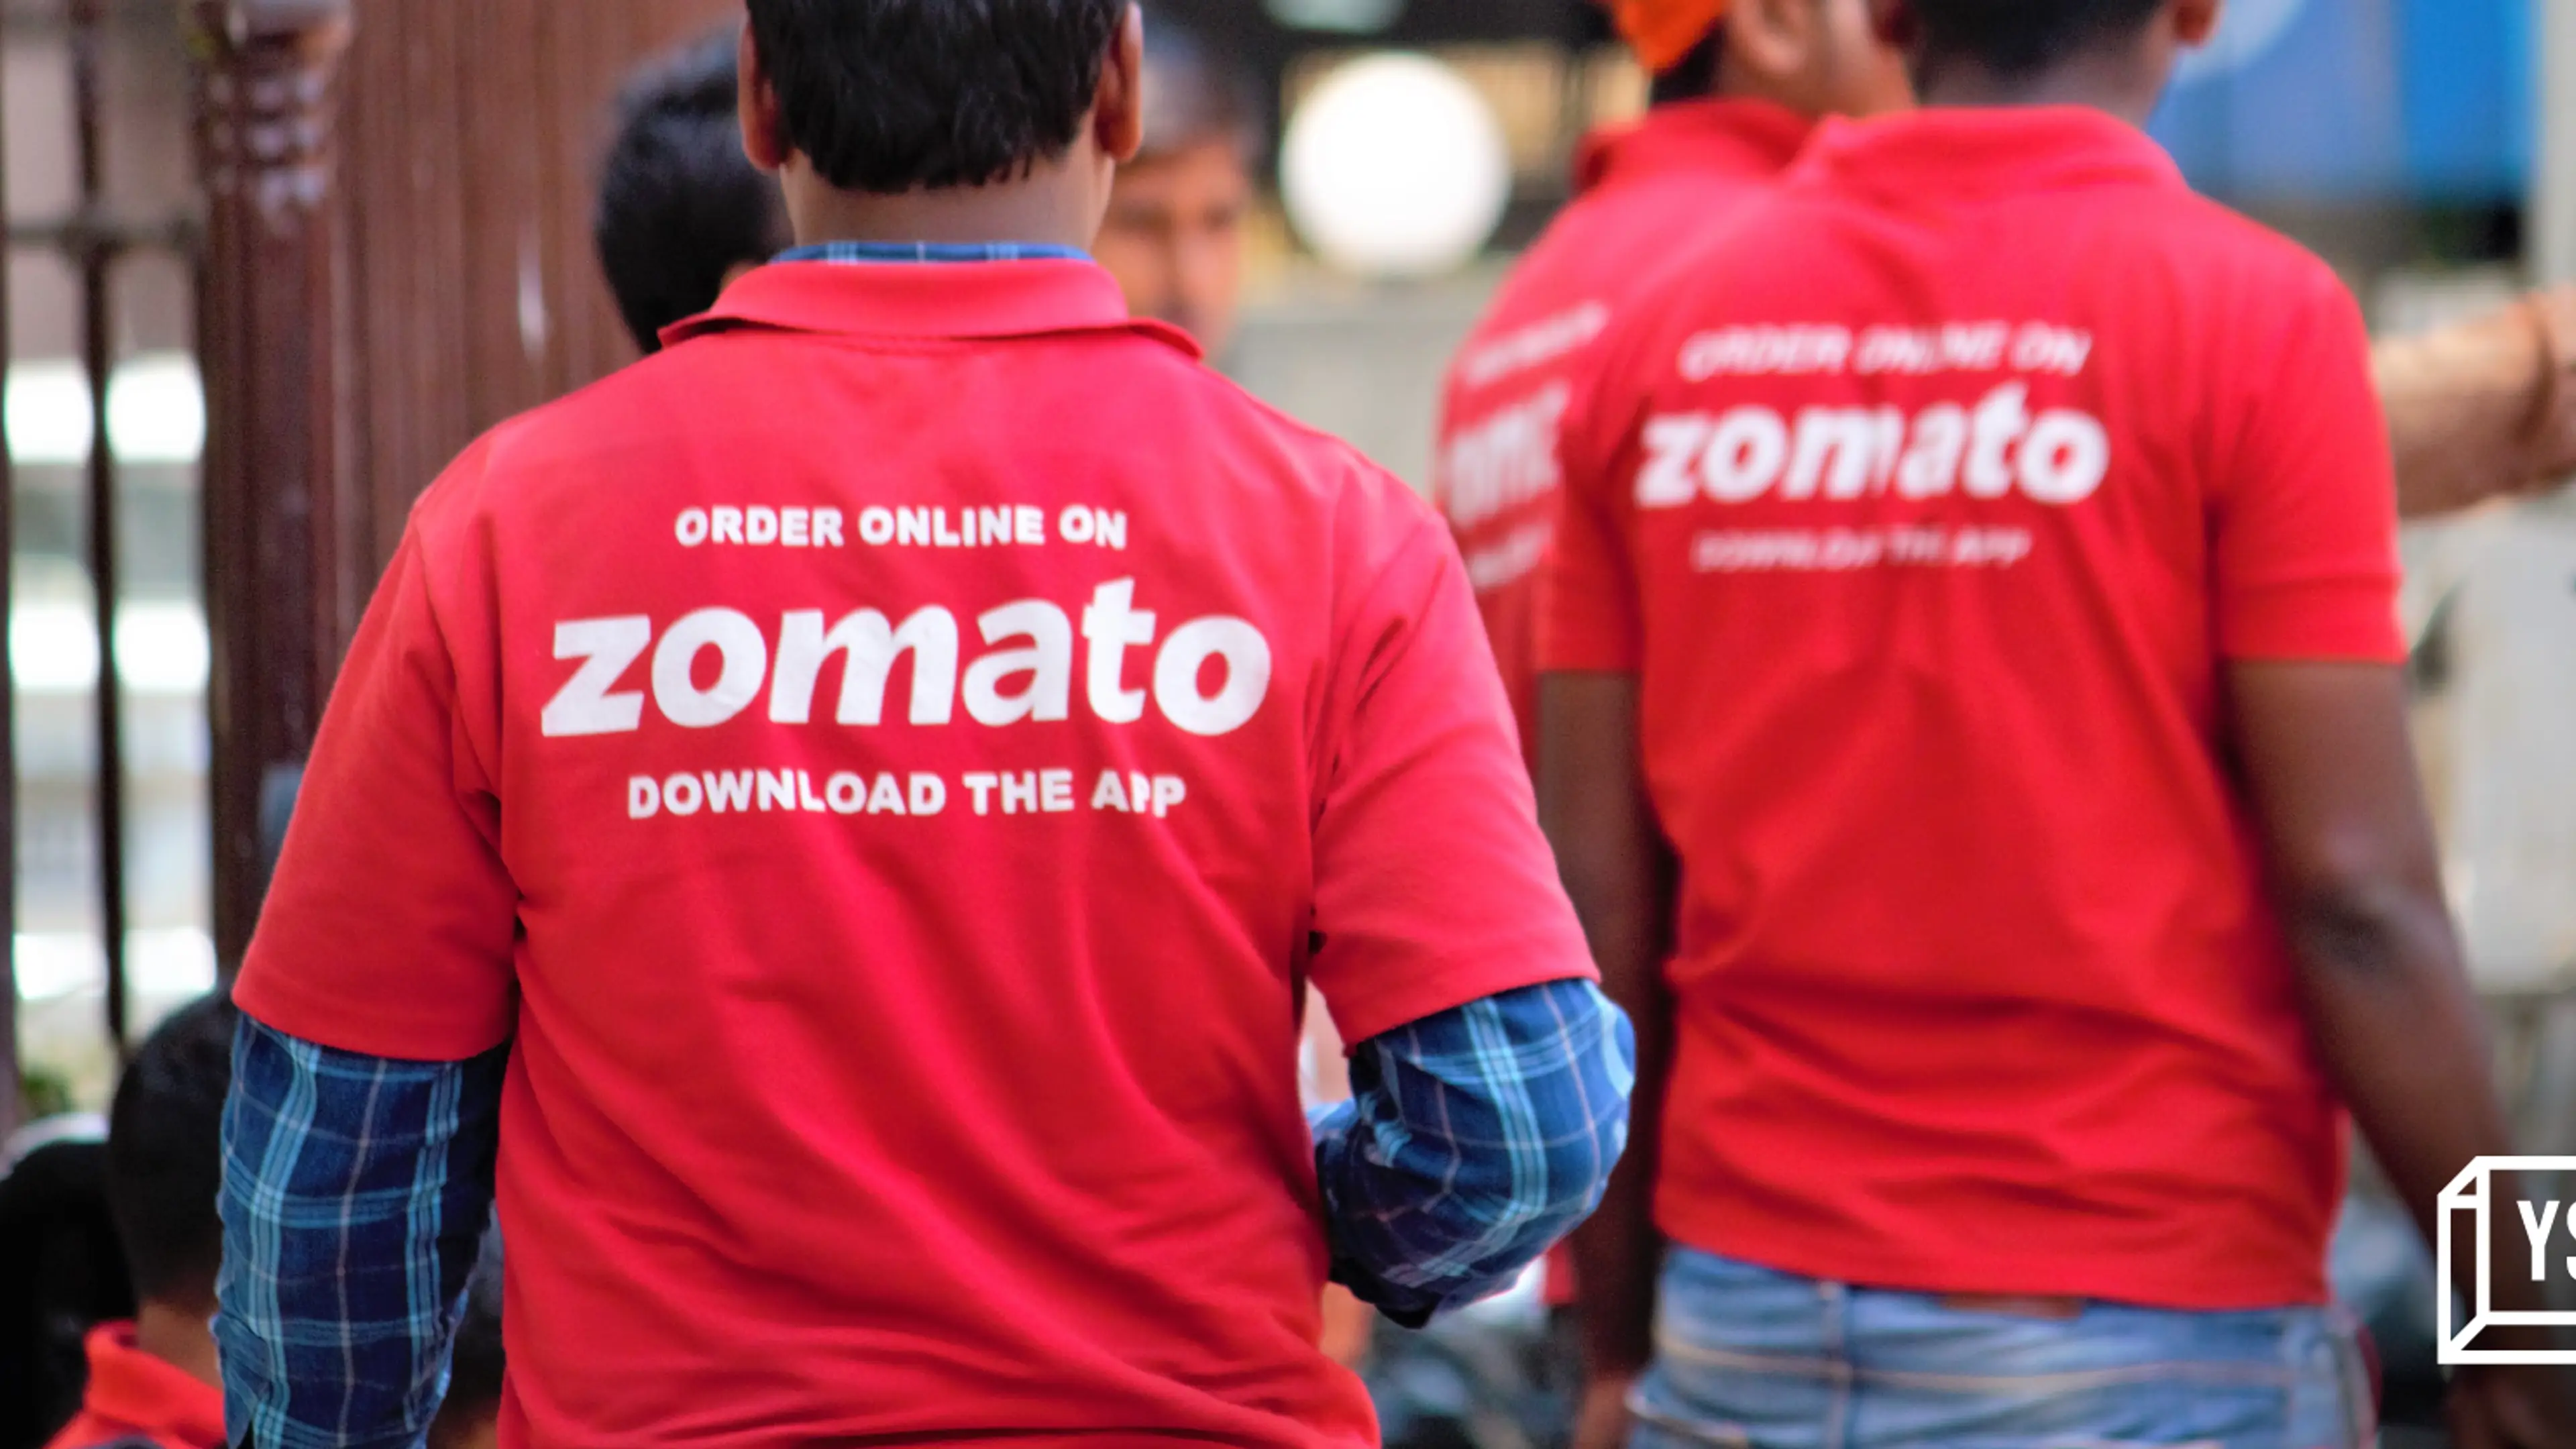 Zomato launches UPI offering for merchant, P2P payments